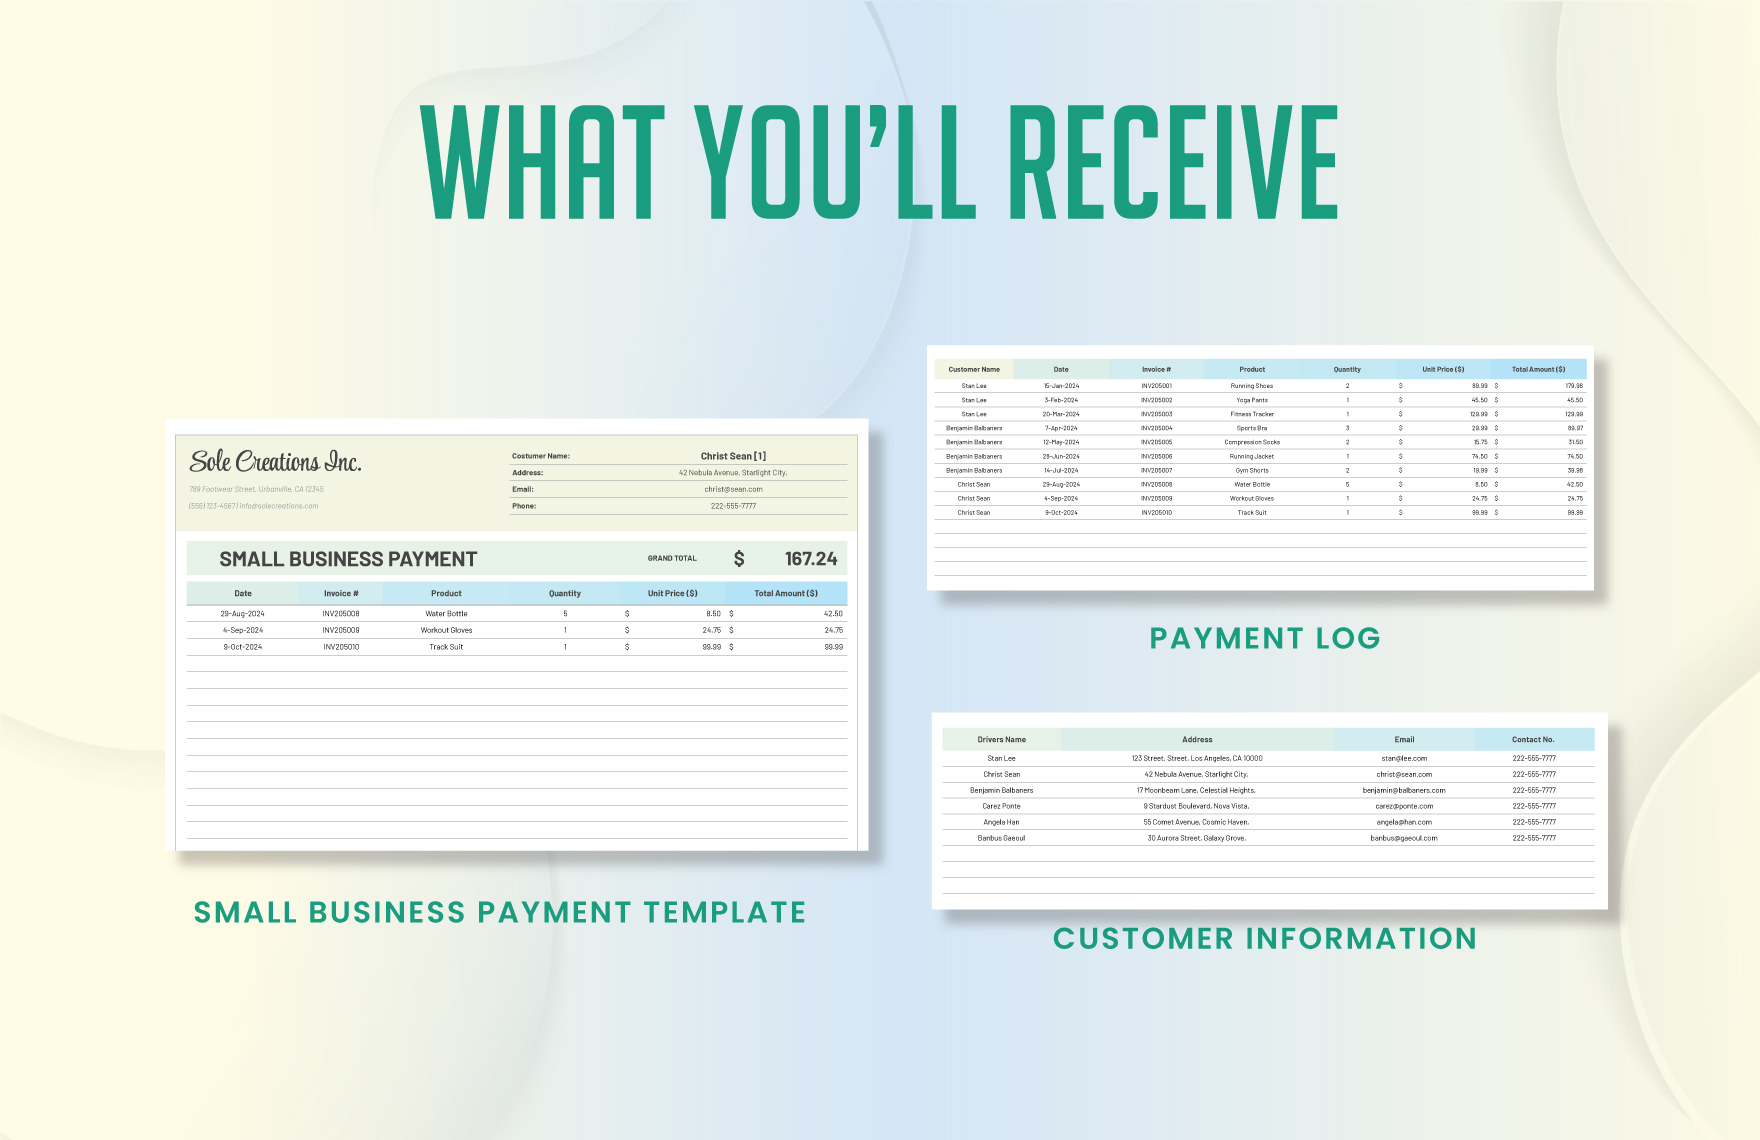 Small Business Payment Template